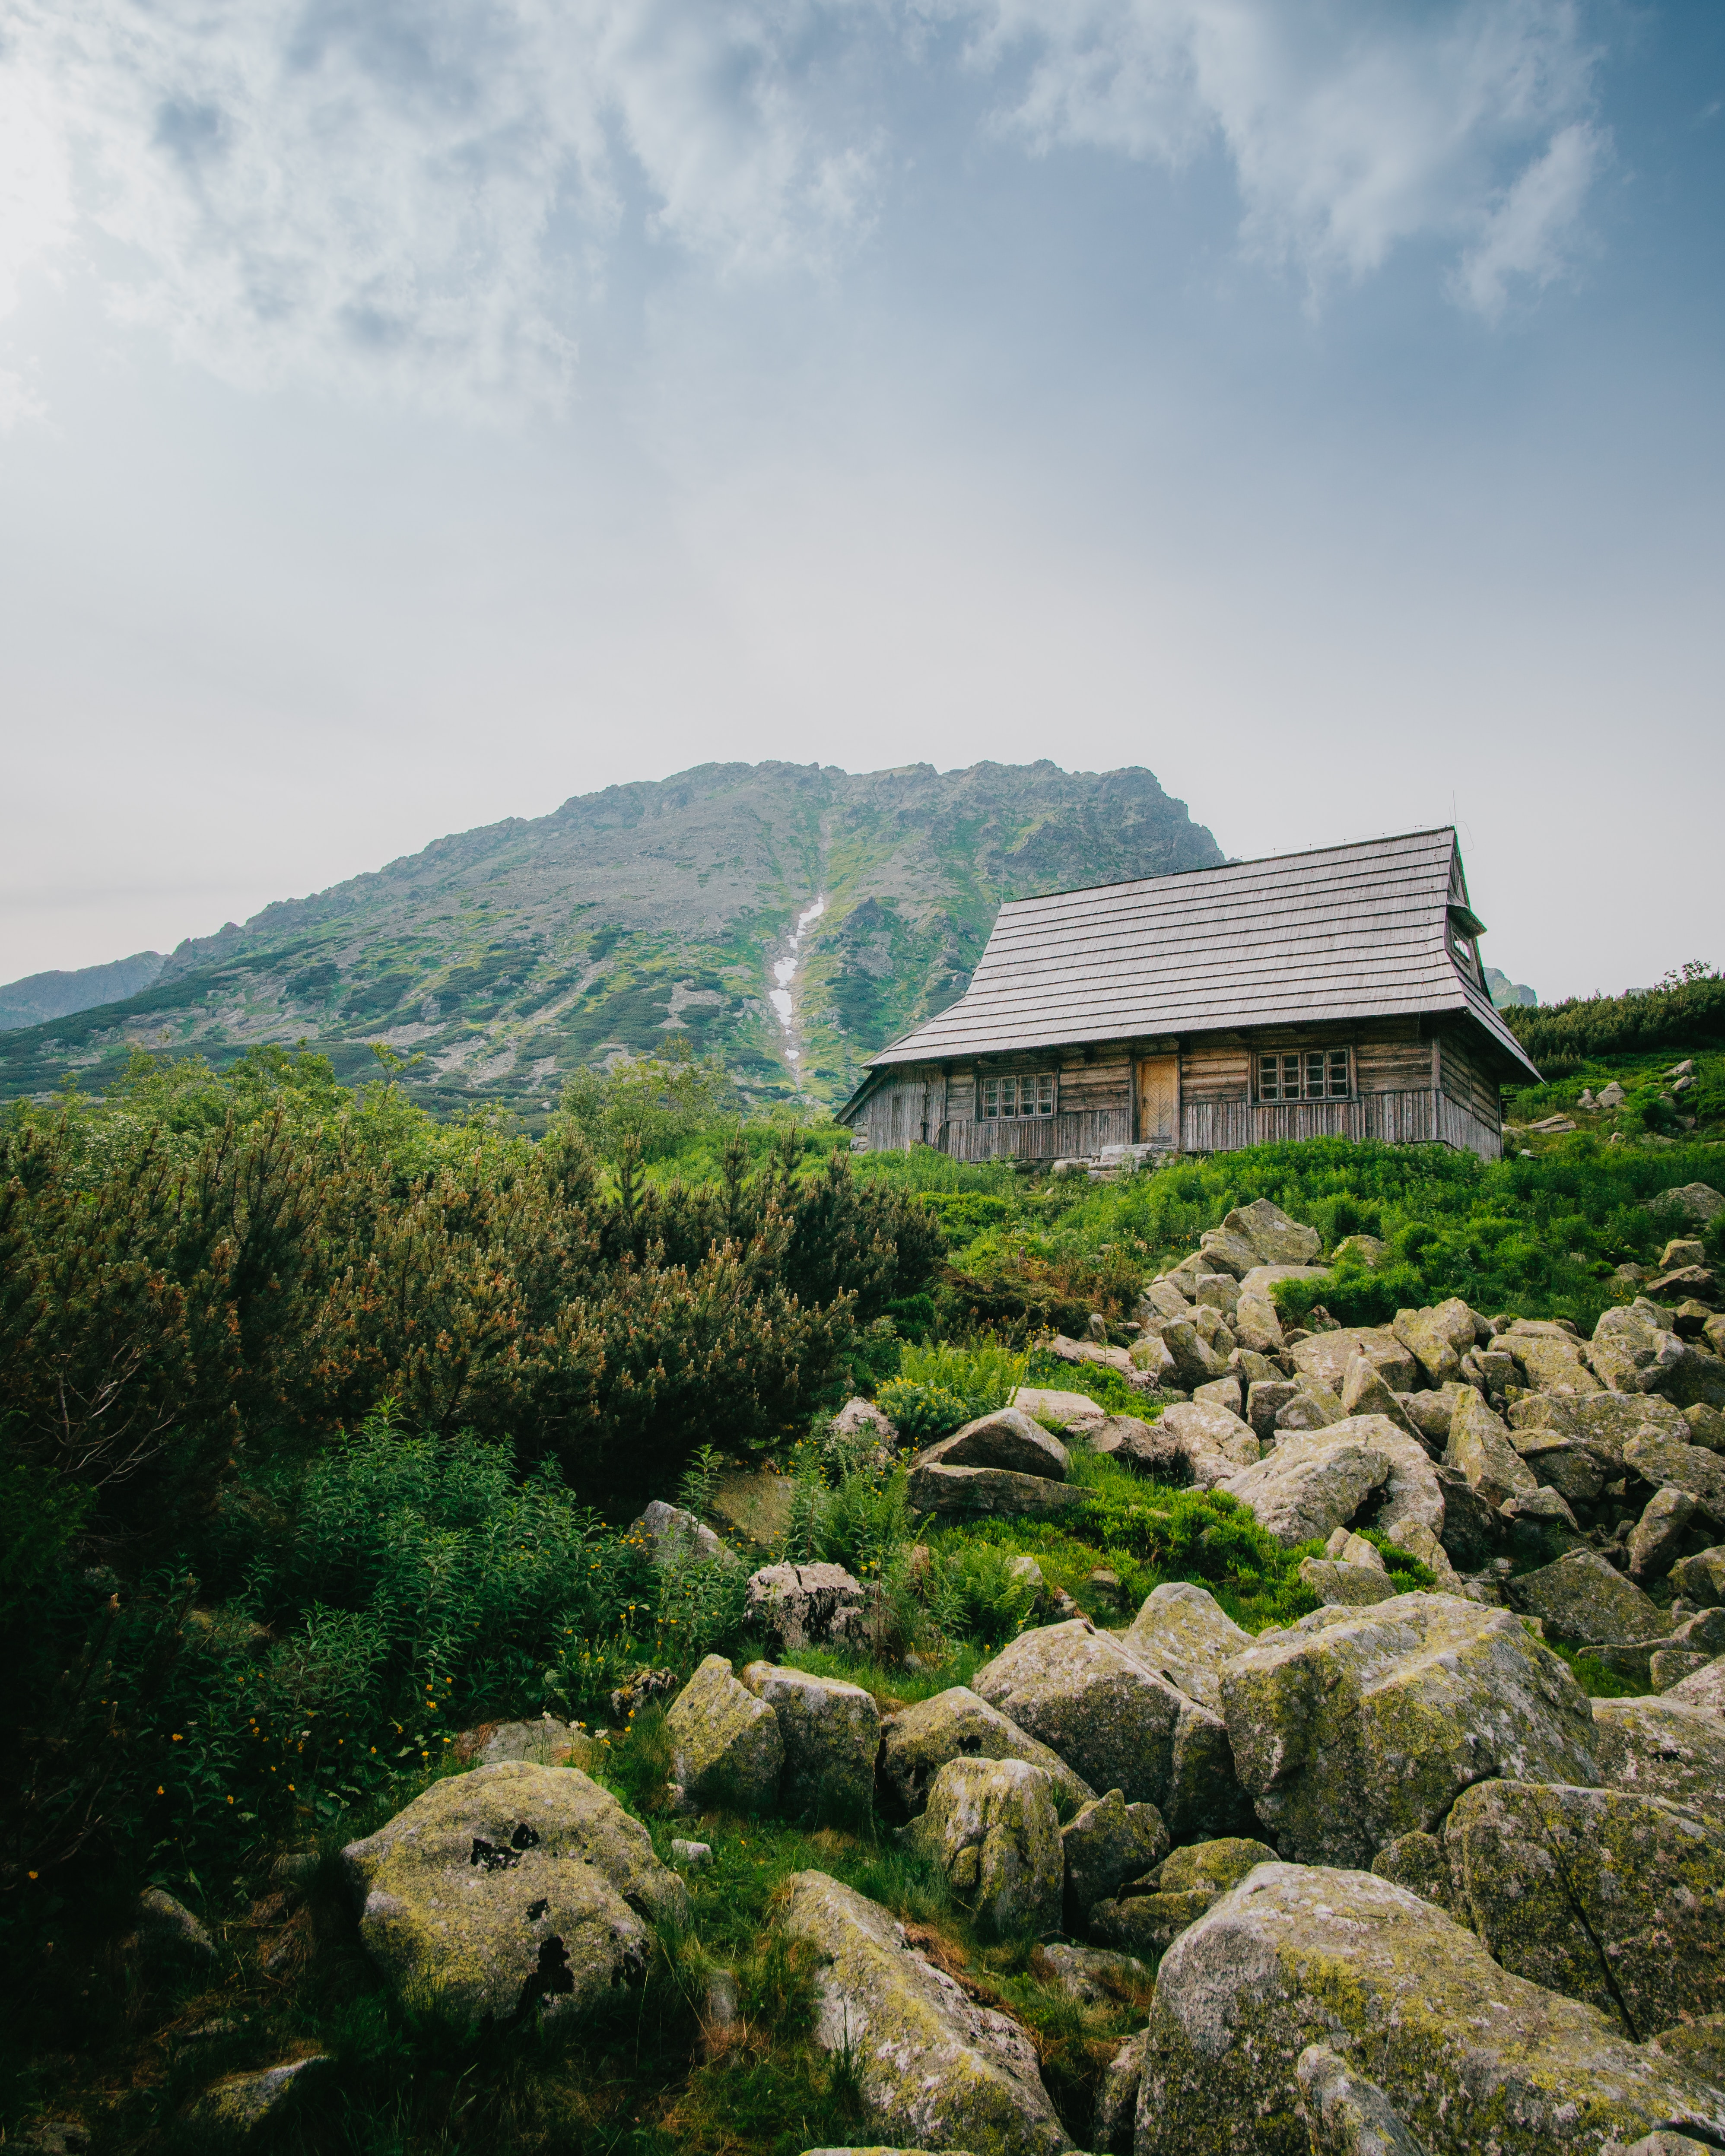 slope, stones, nature, mountains, house cellphone